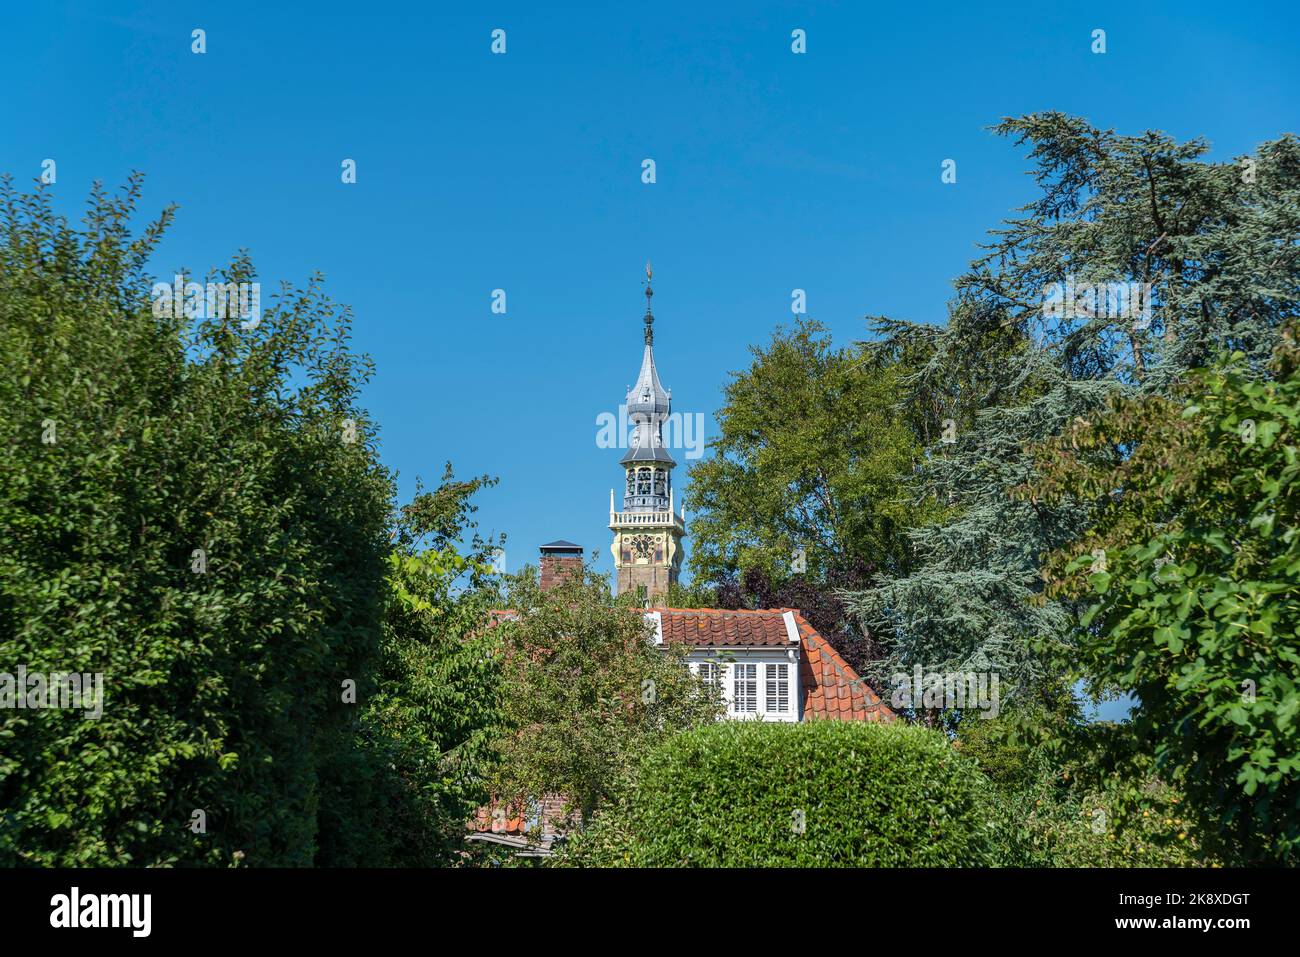 Tower of the historic town hall, Veere, Zeeland, Netherlands, Europe Stock Photo